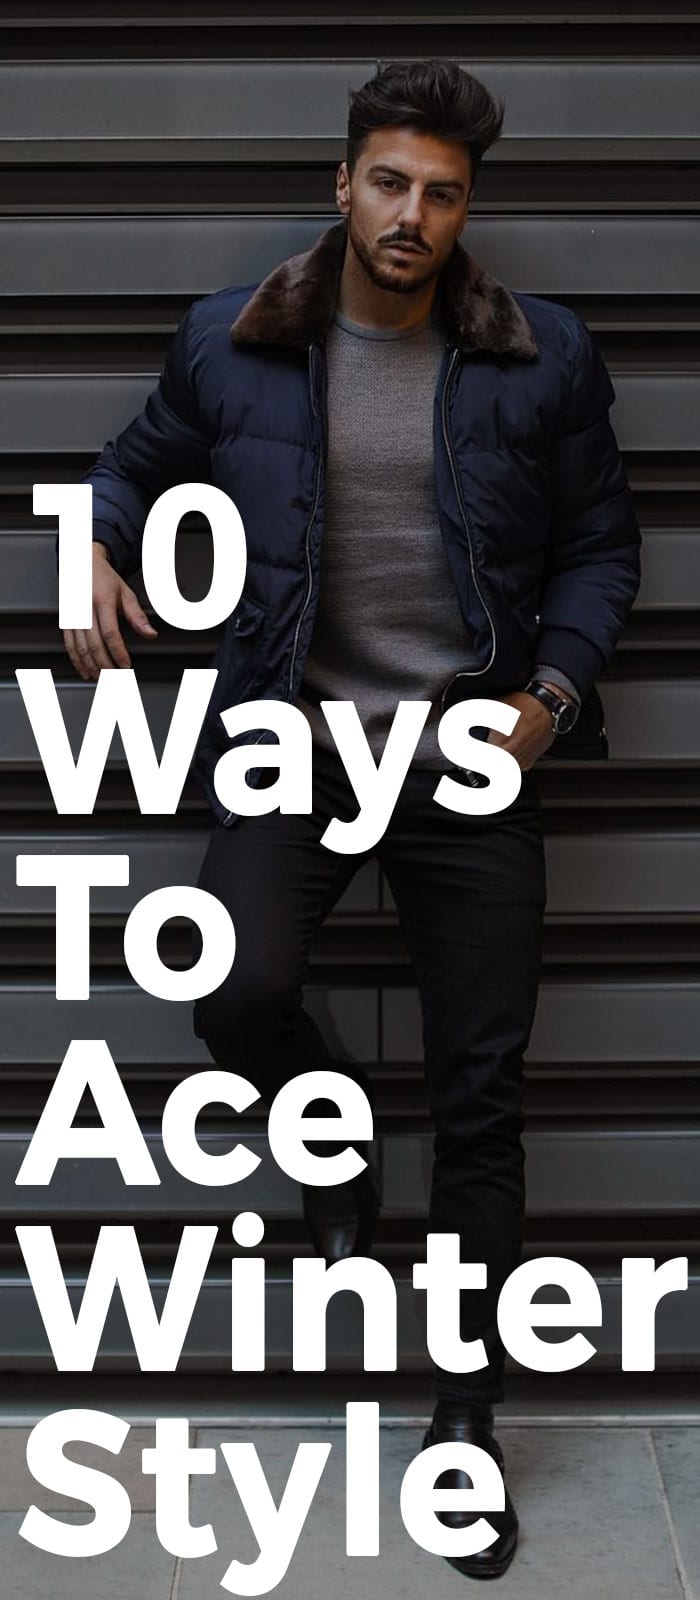 10 Ways To Ace Winter Style.